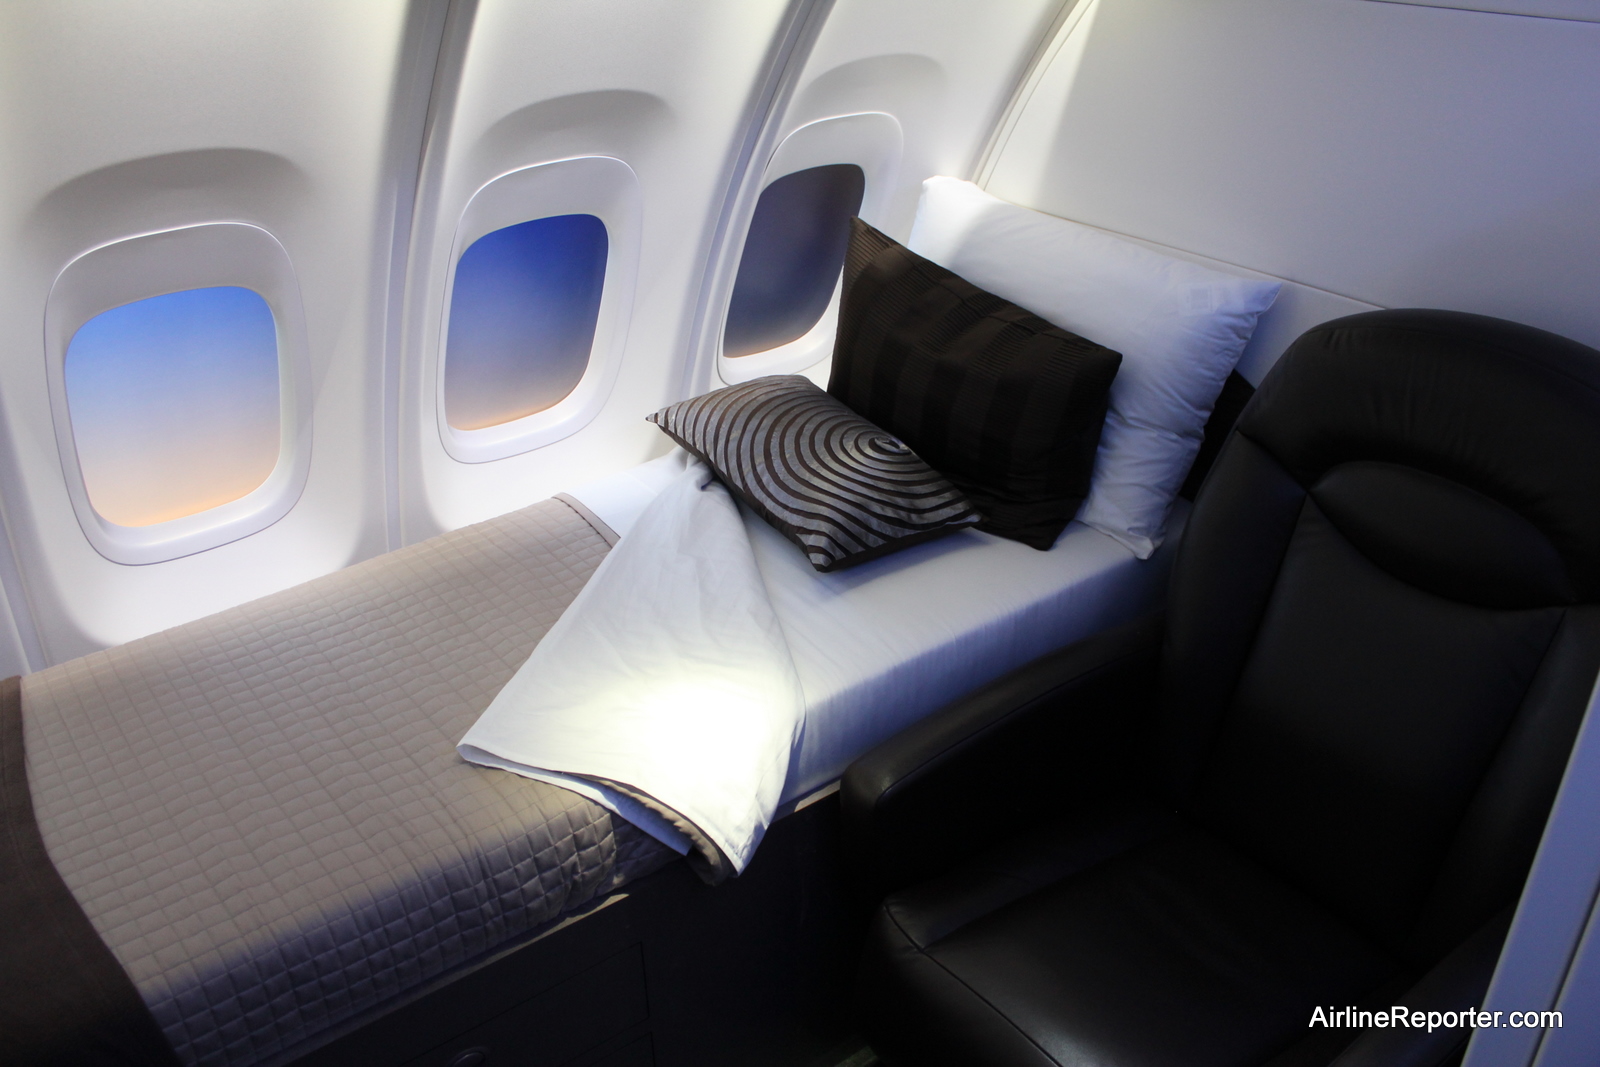 Taking An Interior Tour Of The Boeing 747 8 Intercontinental